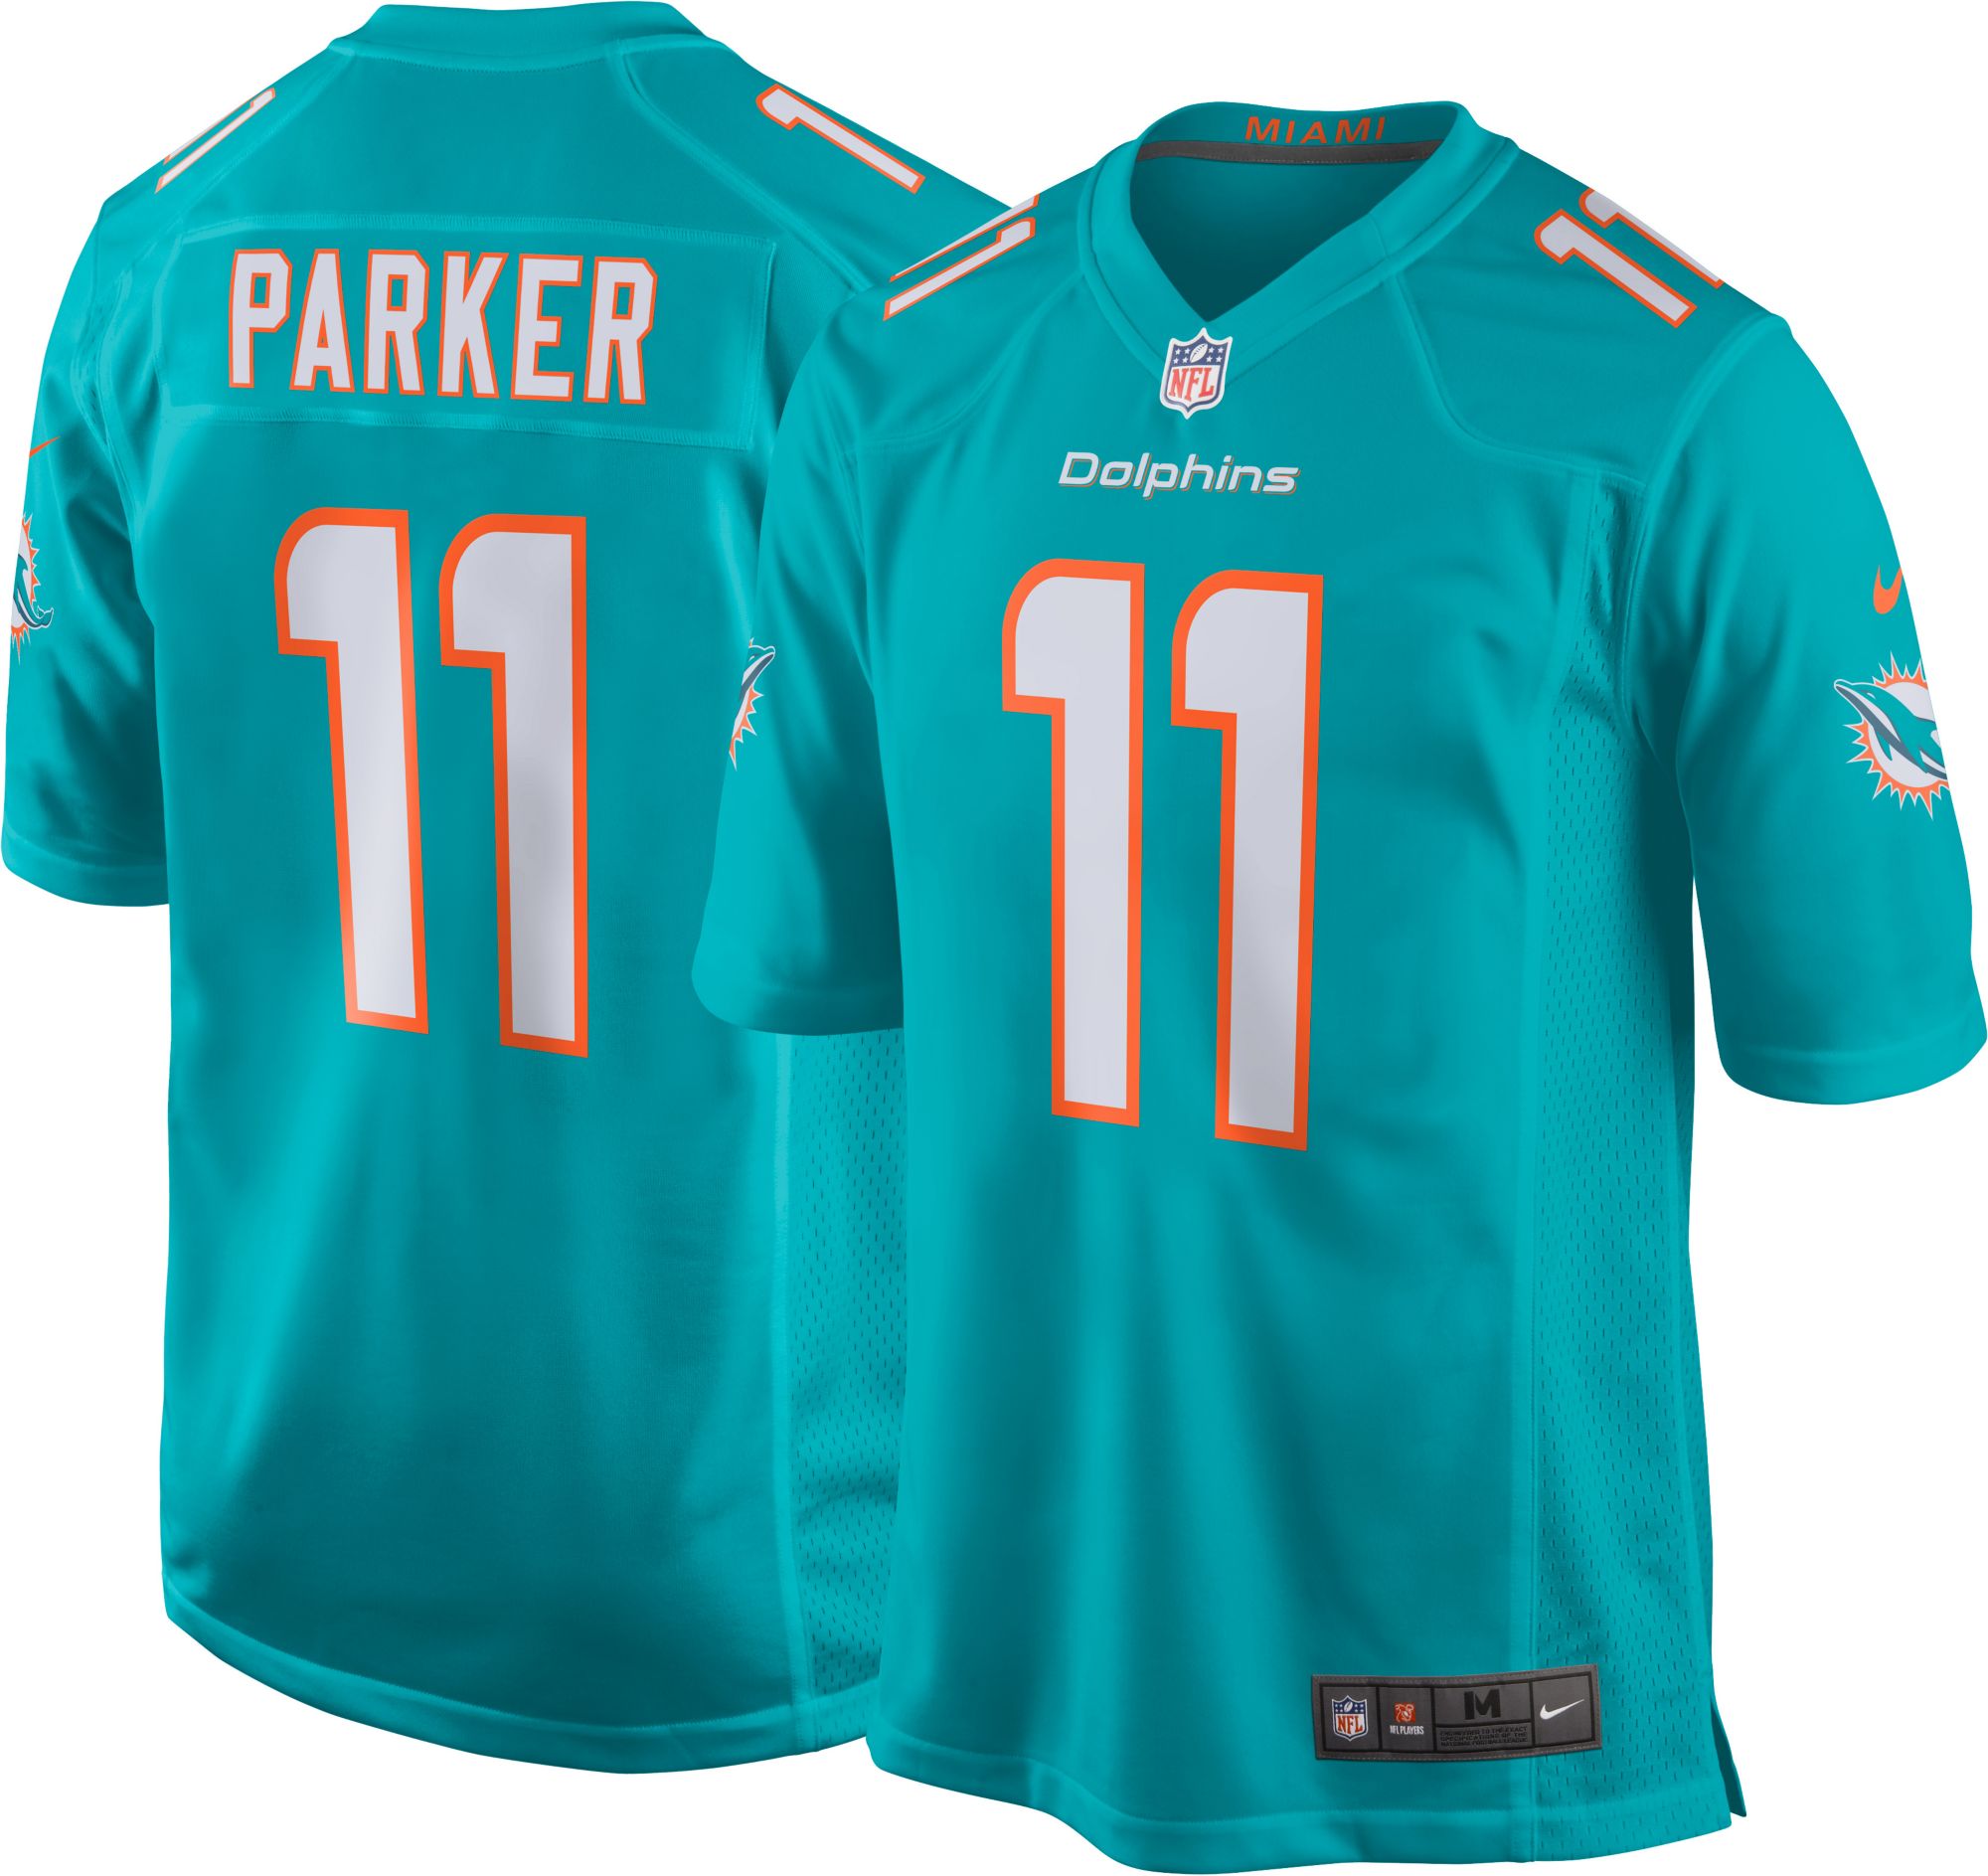 miami dolphins parker jersey